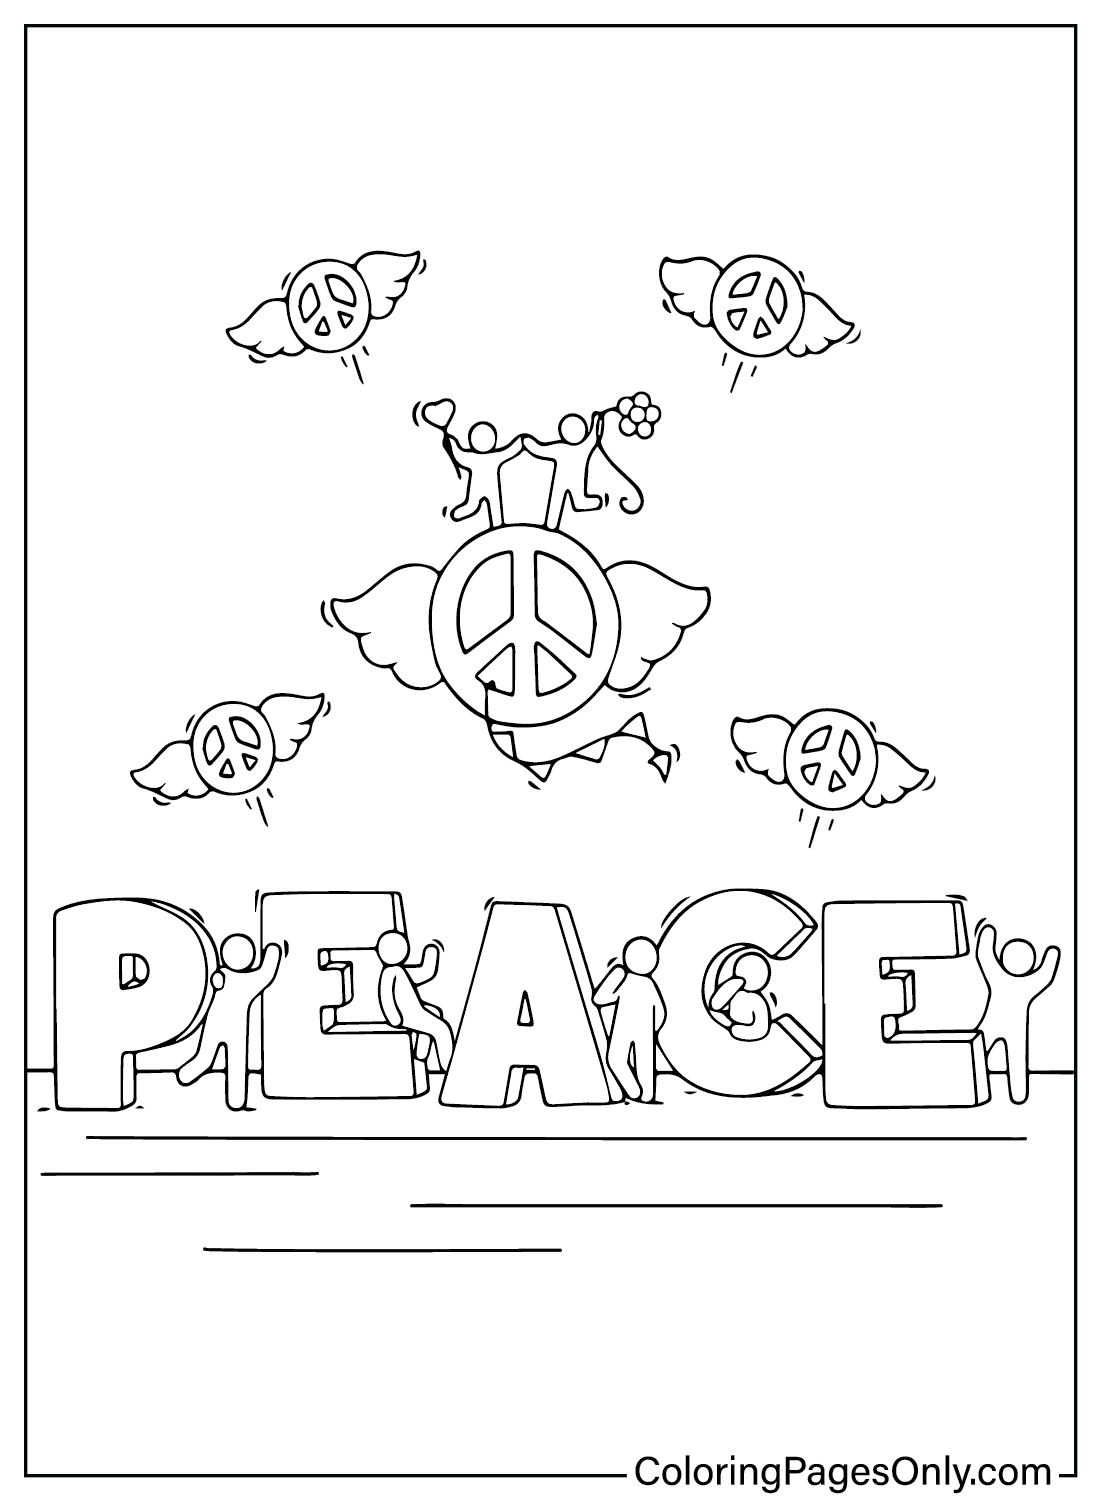 International Day of Peace Coloring Pages to for Kids from International Day of Peace